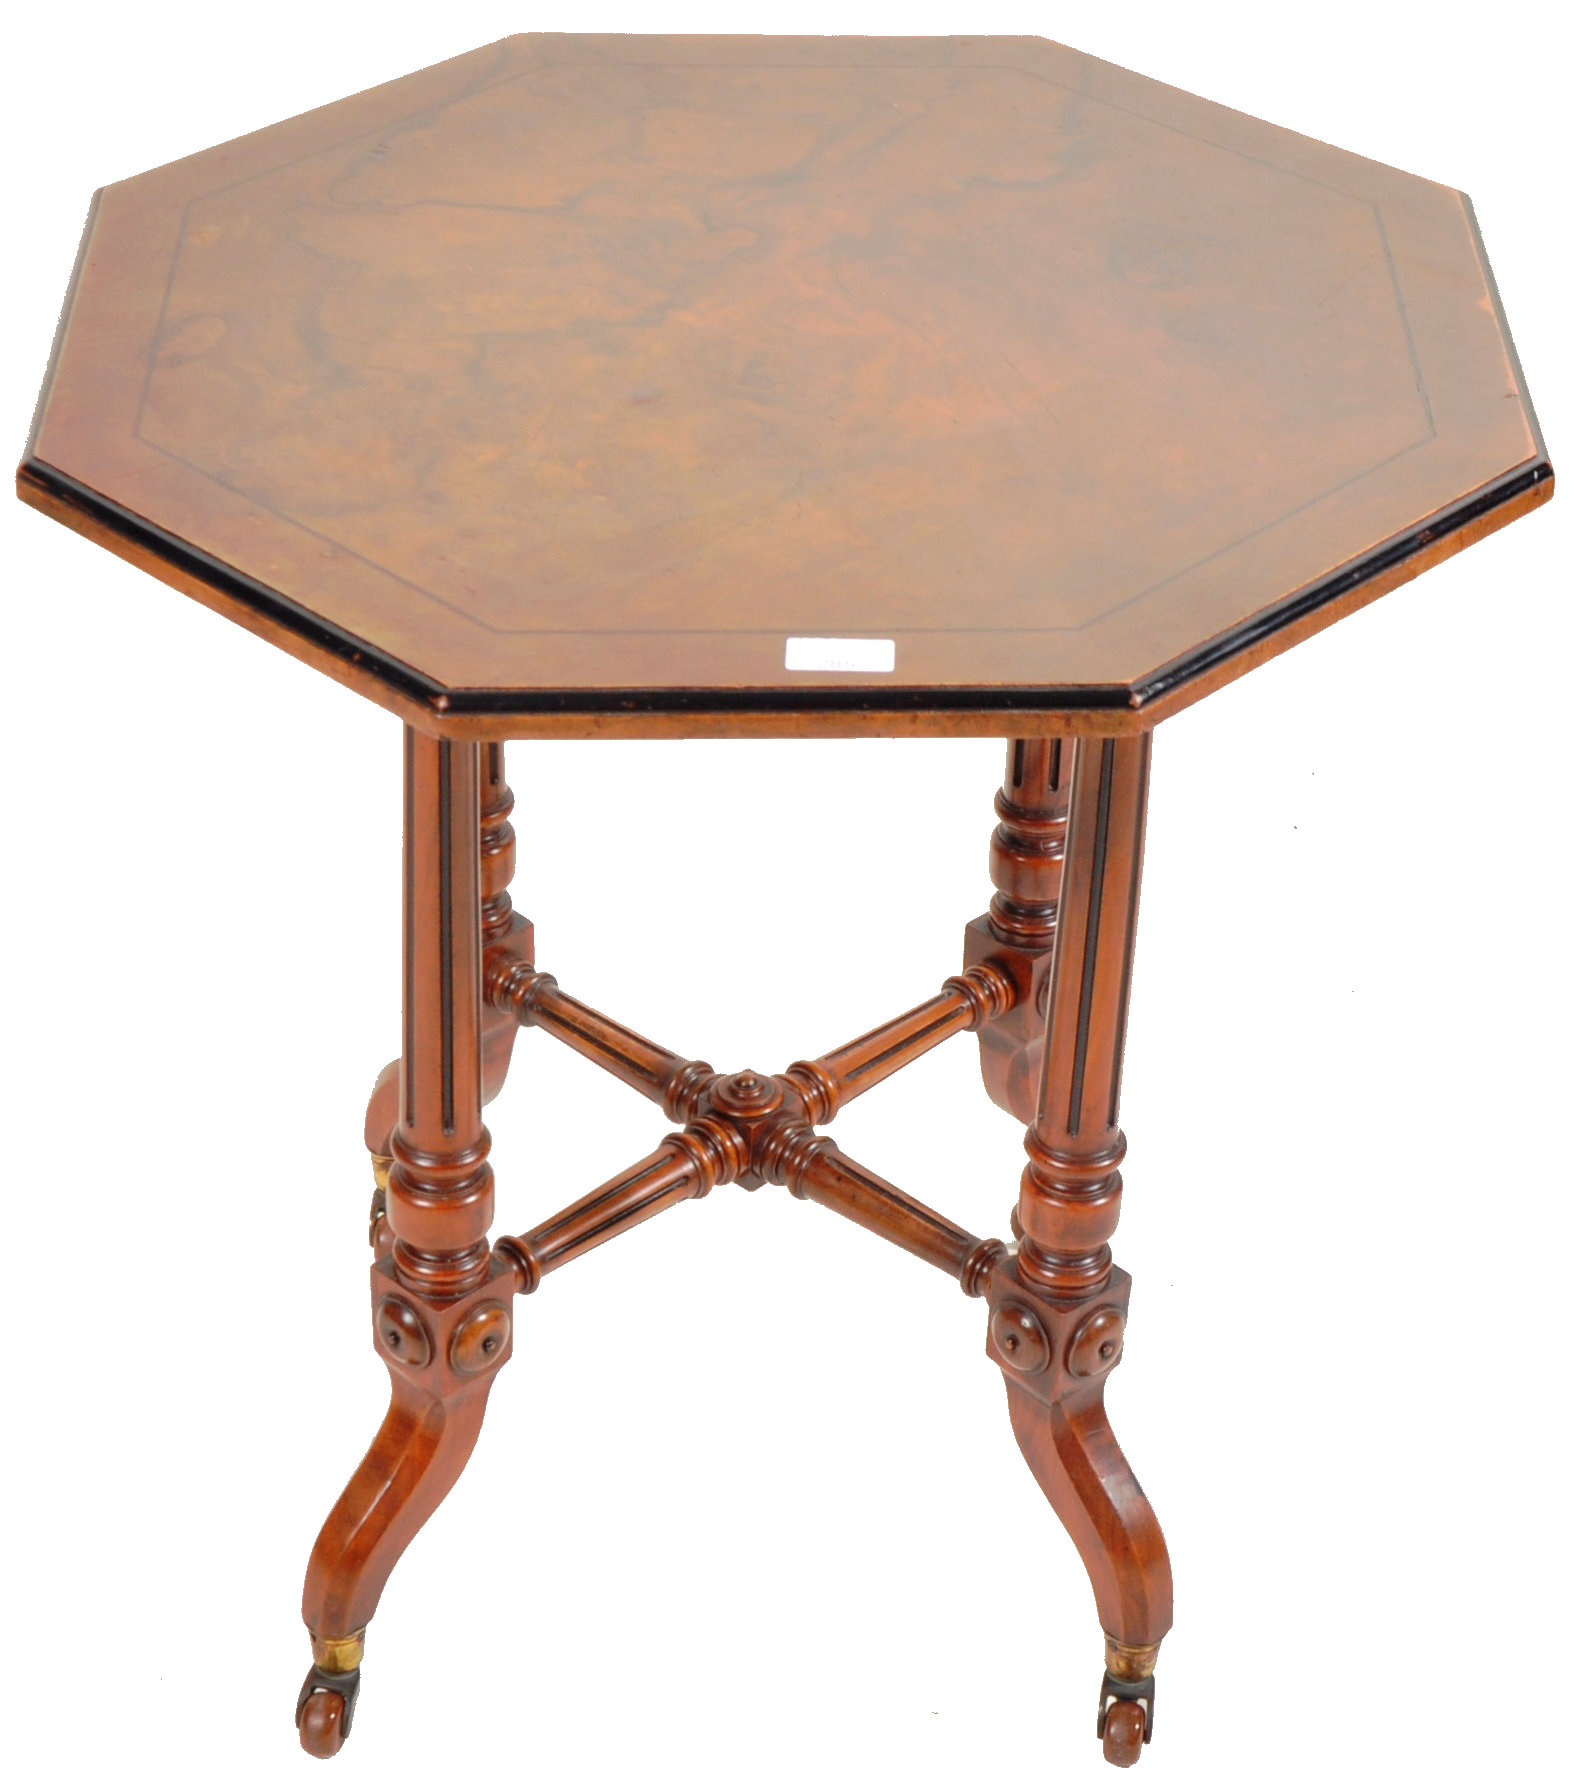 19TH CENTURY VICTORIAN AESTHETIC WALNUT GILLOW MANNER TABLE